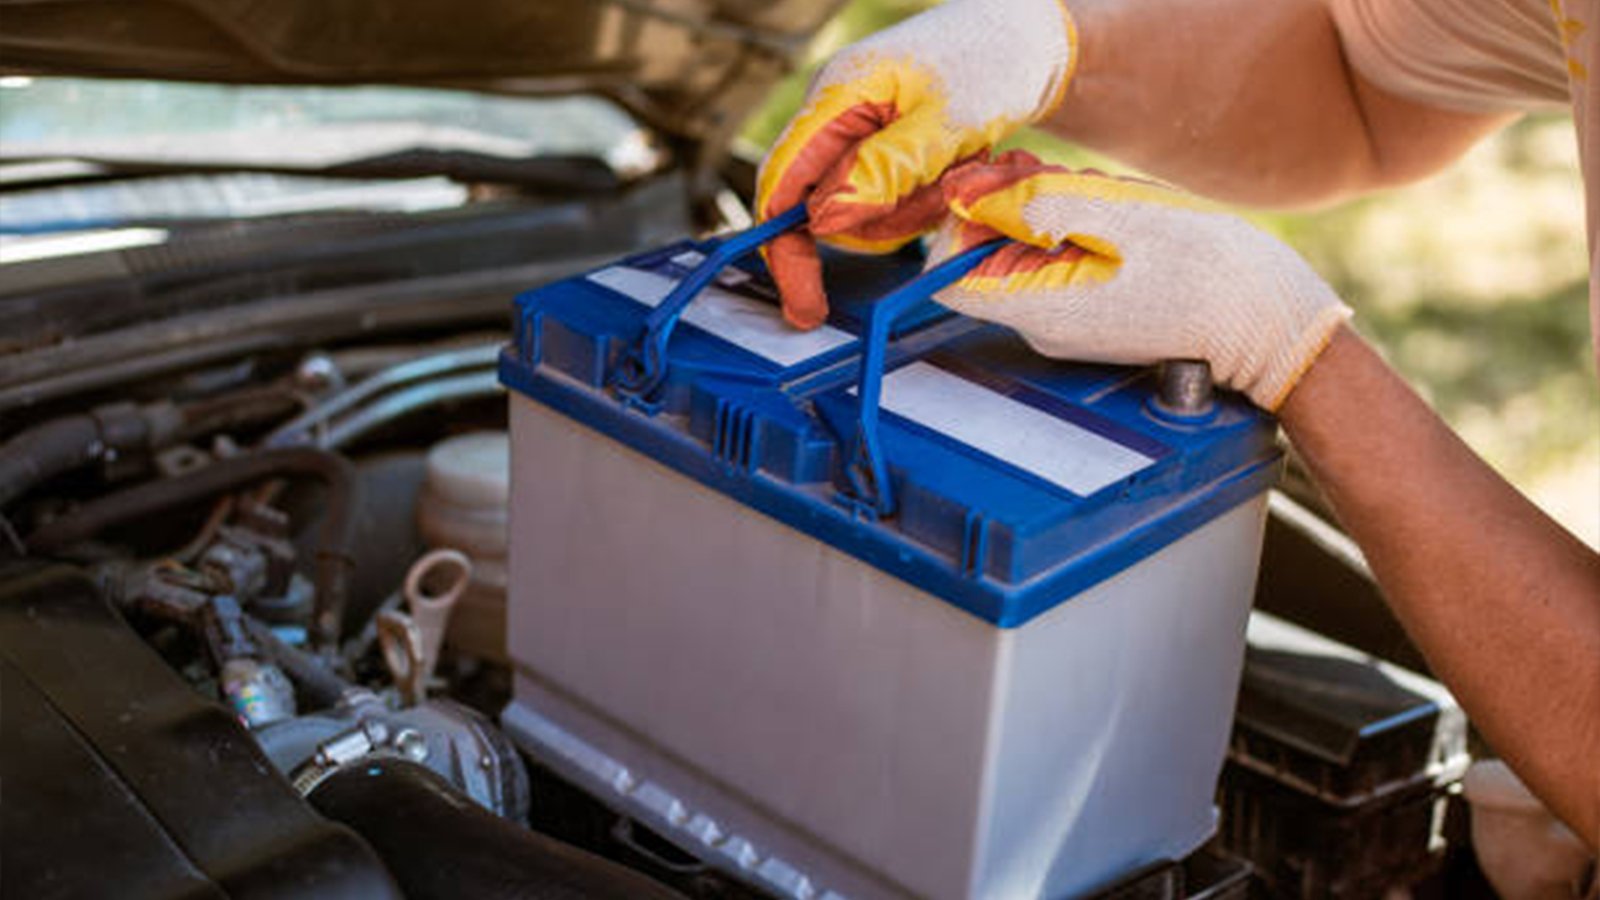 How to Choose the Right Car Battery for Your Vehicle